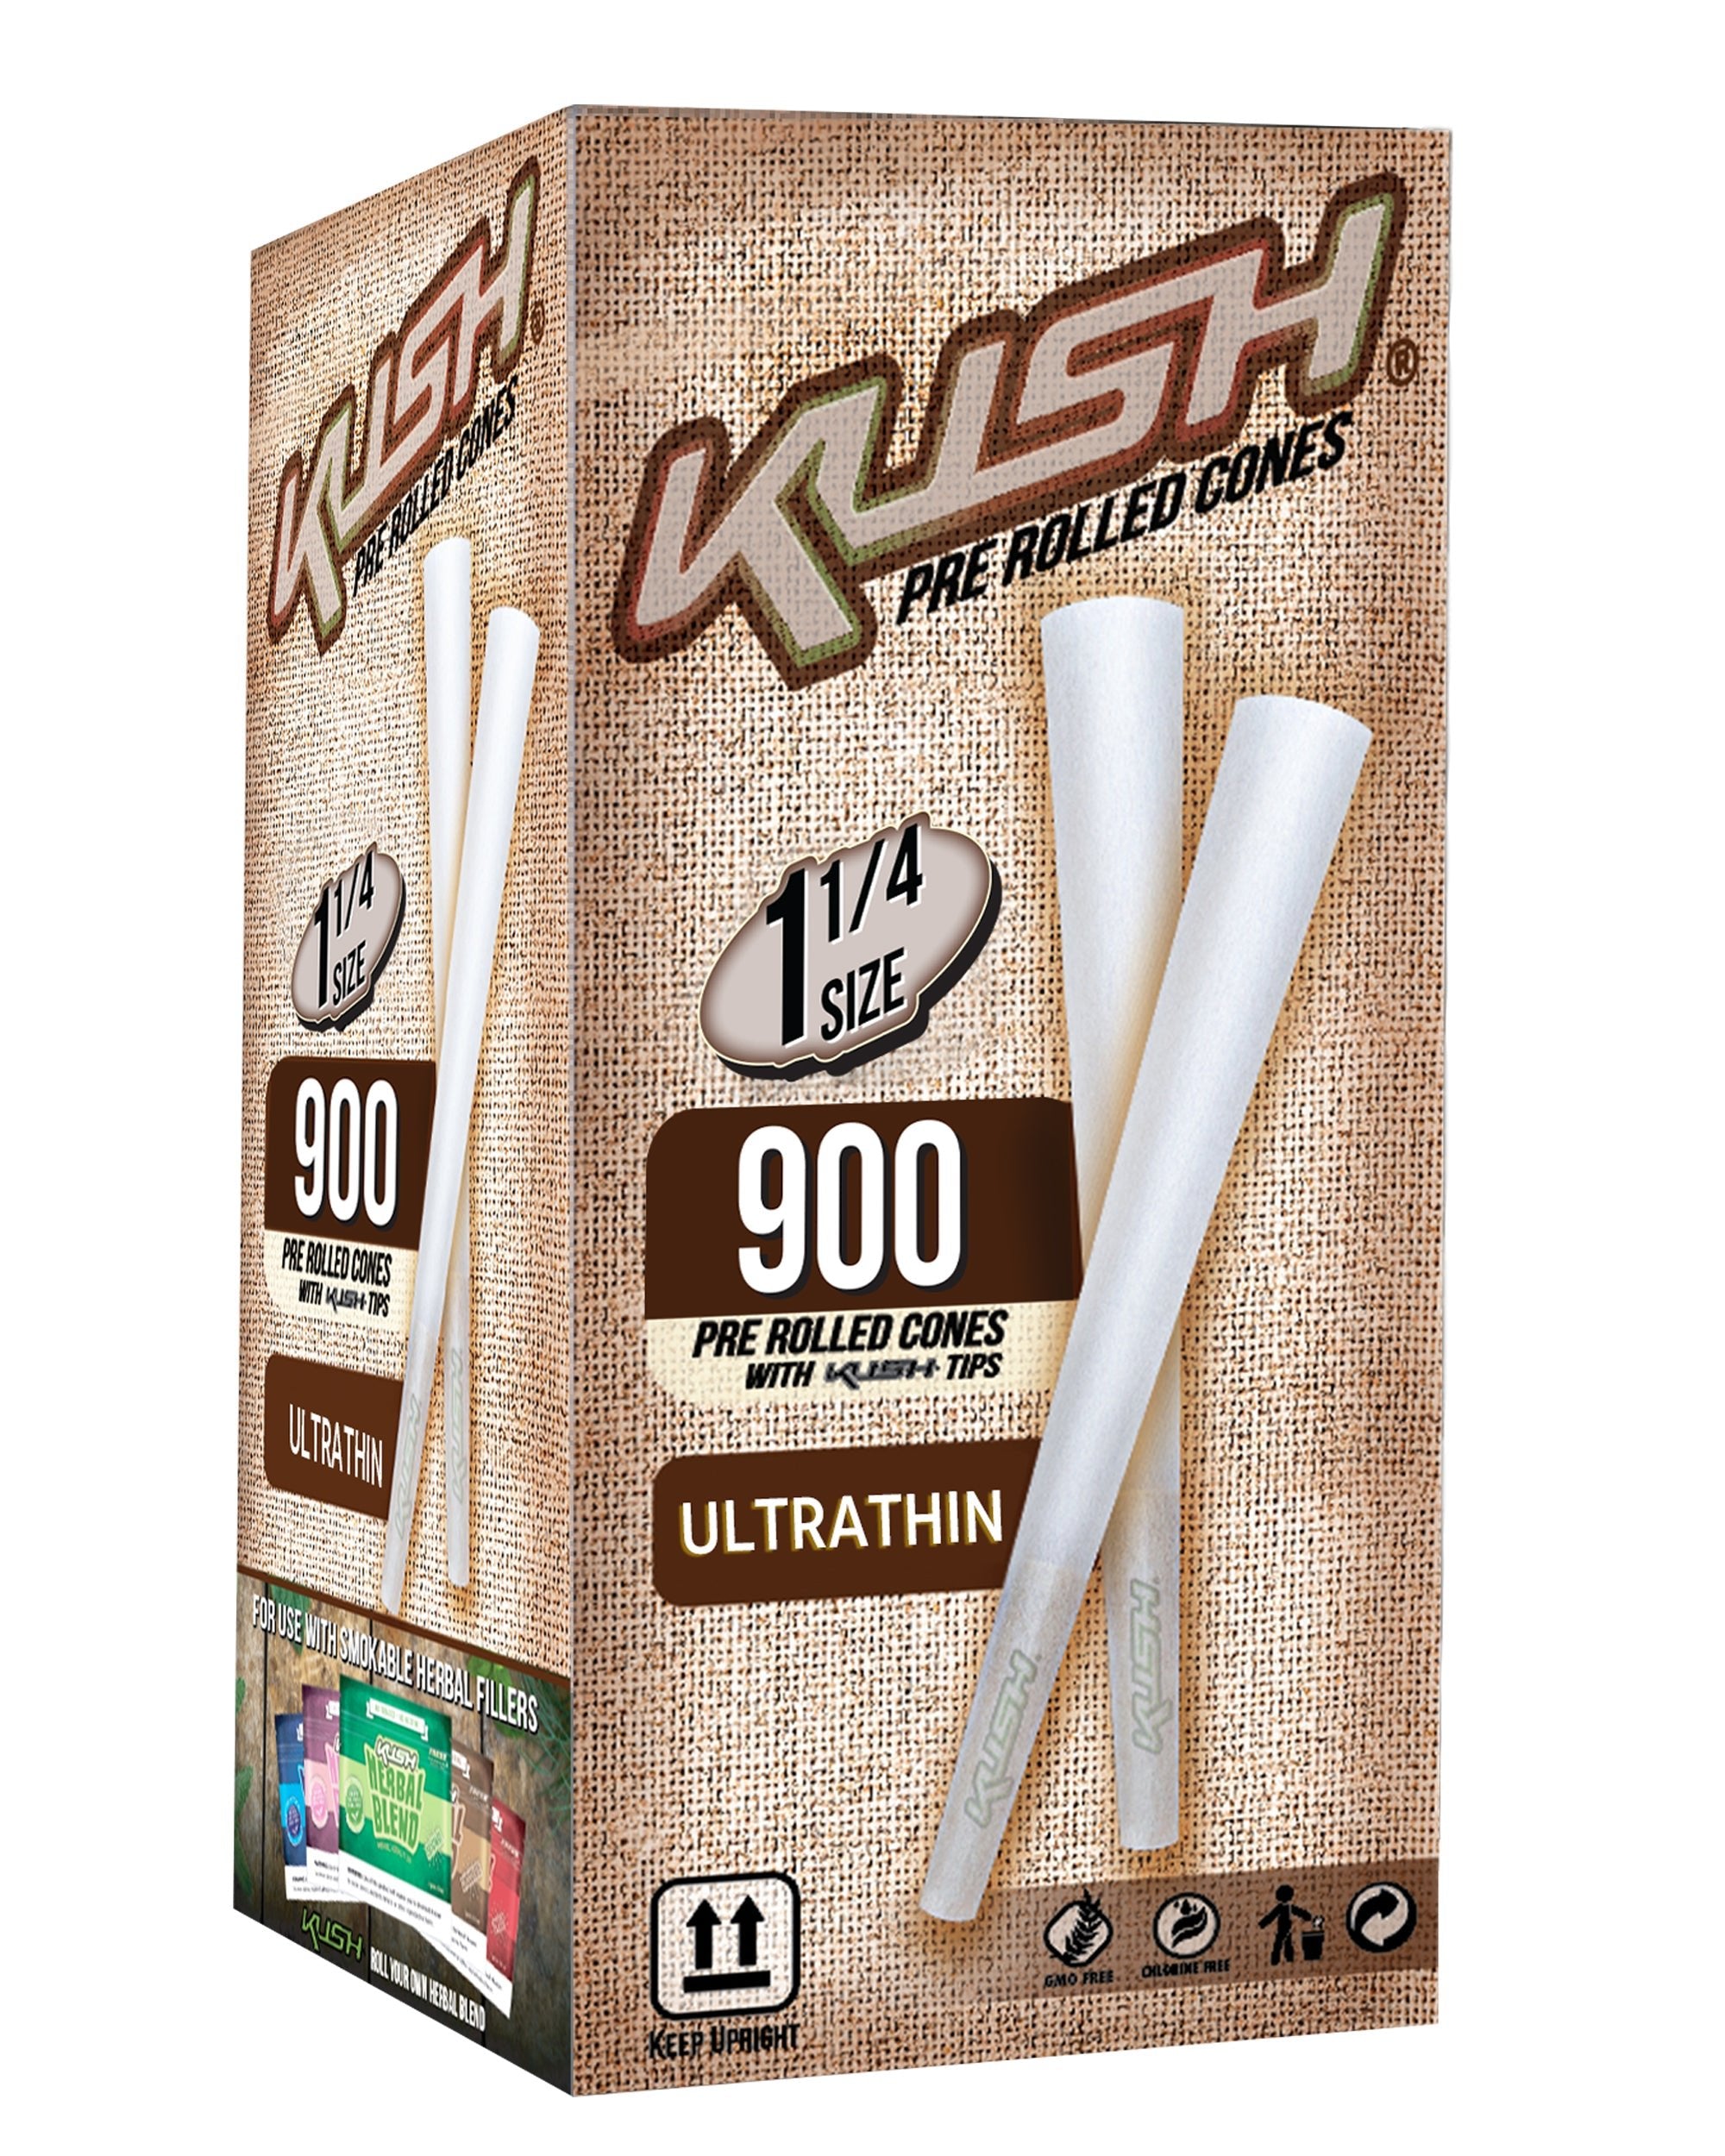 KUSH | Ultra Thin 1 1/4 Pre-Rolled Cones w/ Filter Tip | 84mm - Classic White Paper - 900 Count - 1